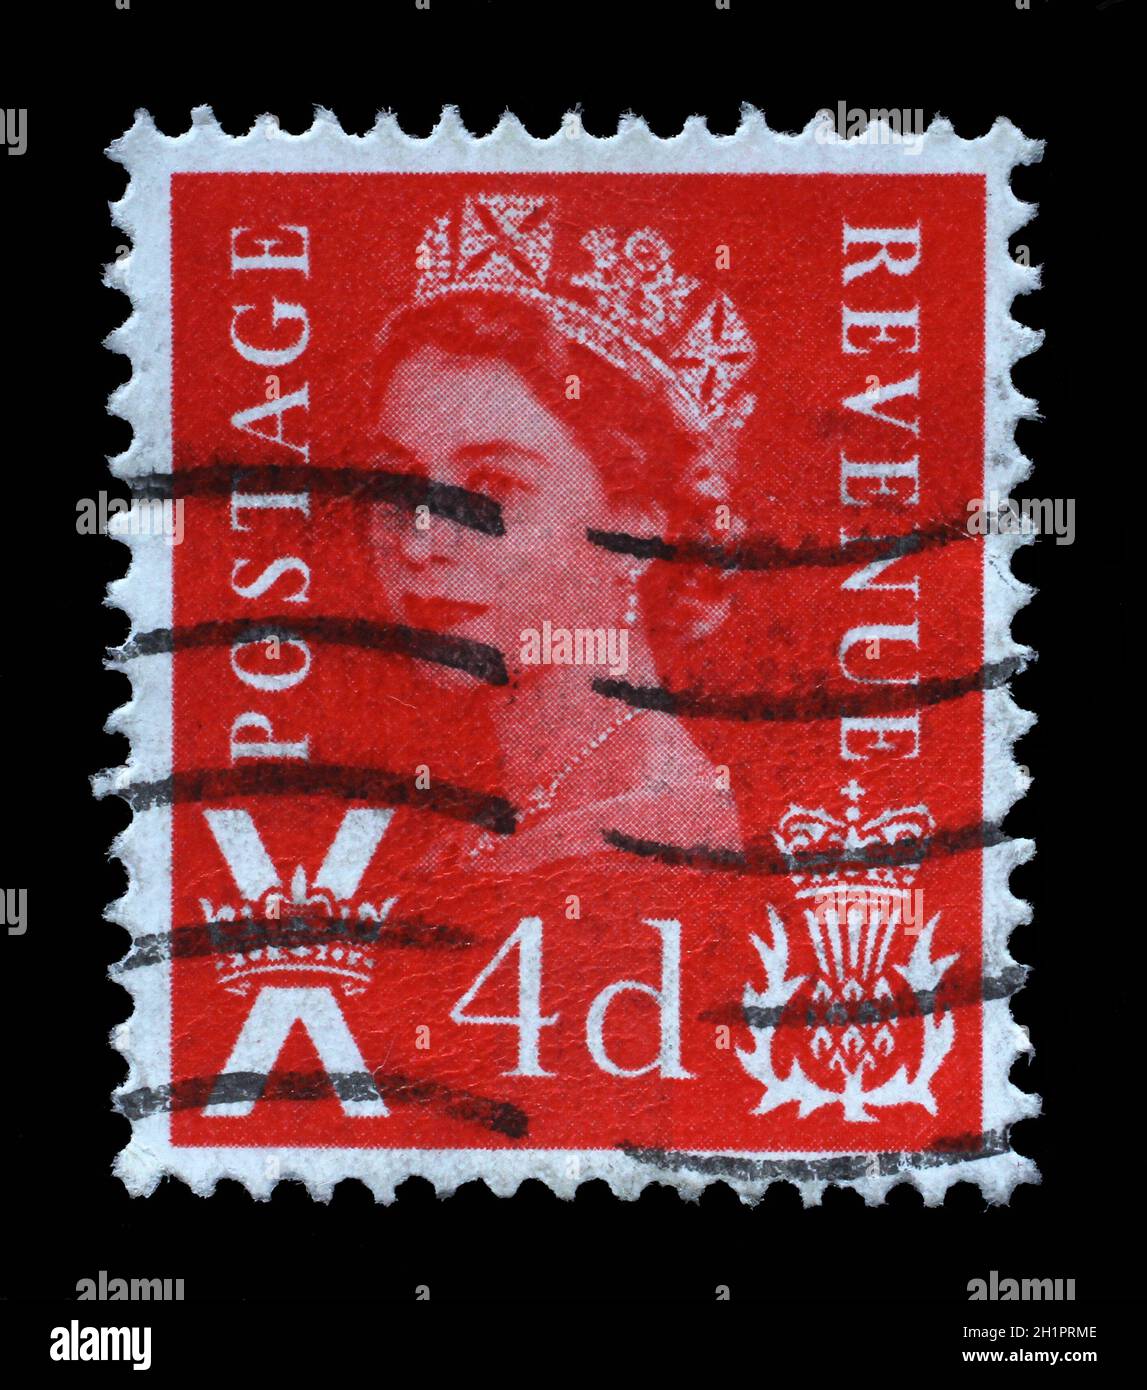 Scottish Used Postage Stamp showing Portrait of Queen Elizabeth 2nd, circa 1958 to 1970 Stock Photo